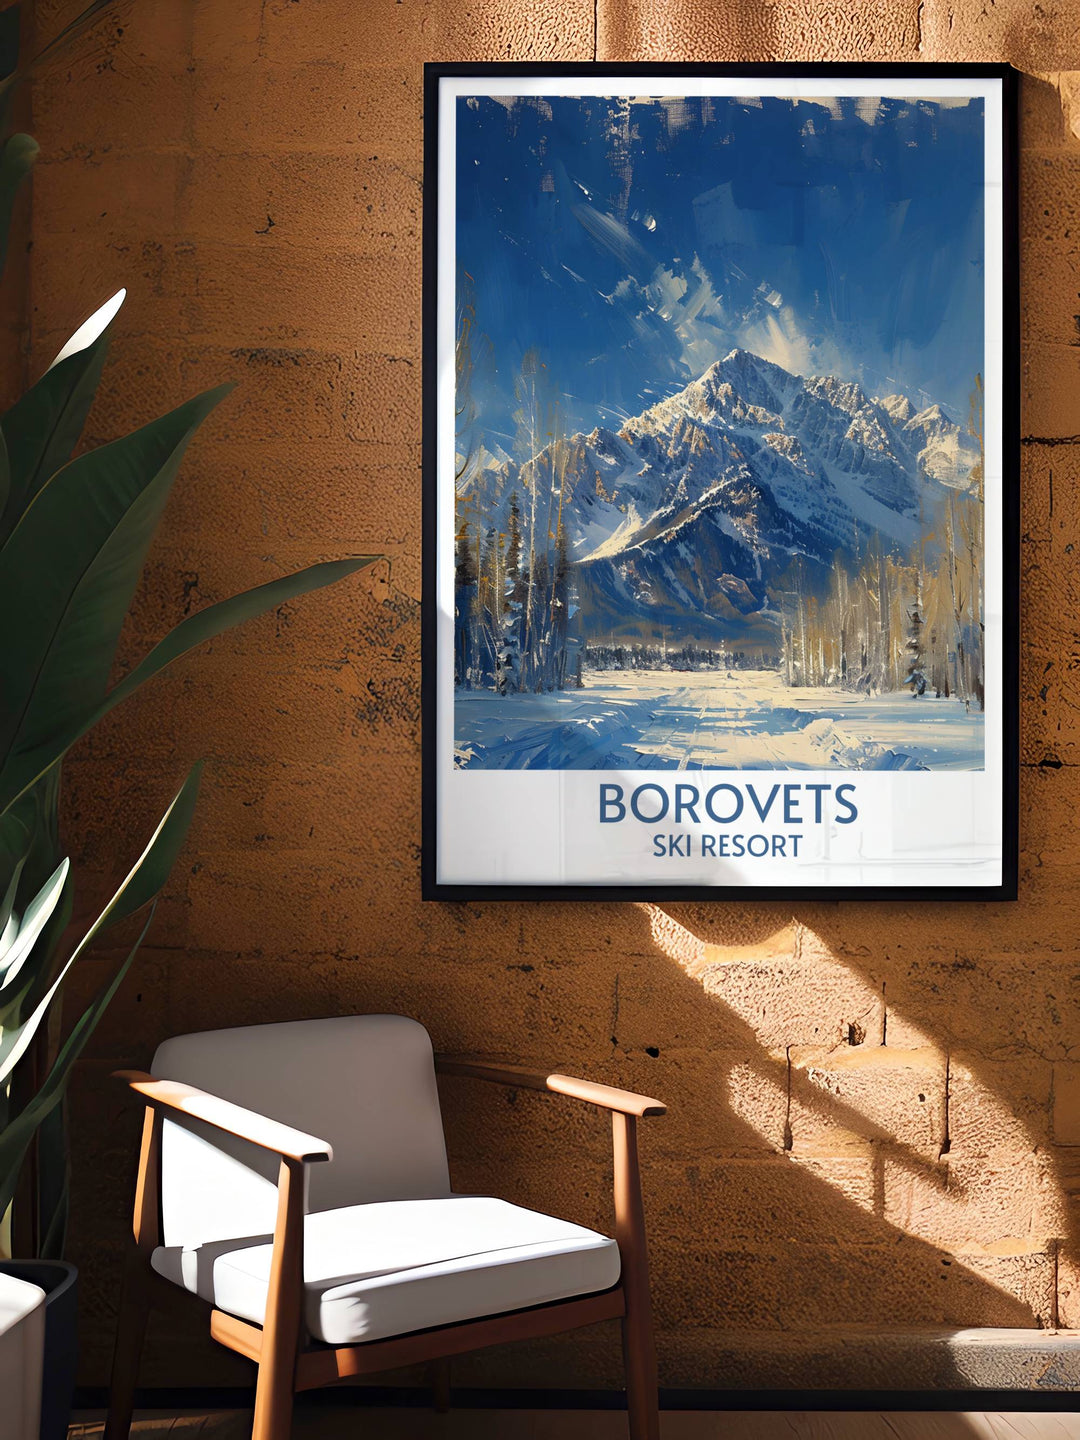 Retro skiing poster featuring skiers on the slopes of Borovets with Mount Musala towering in the distance, great for a ski resort poster